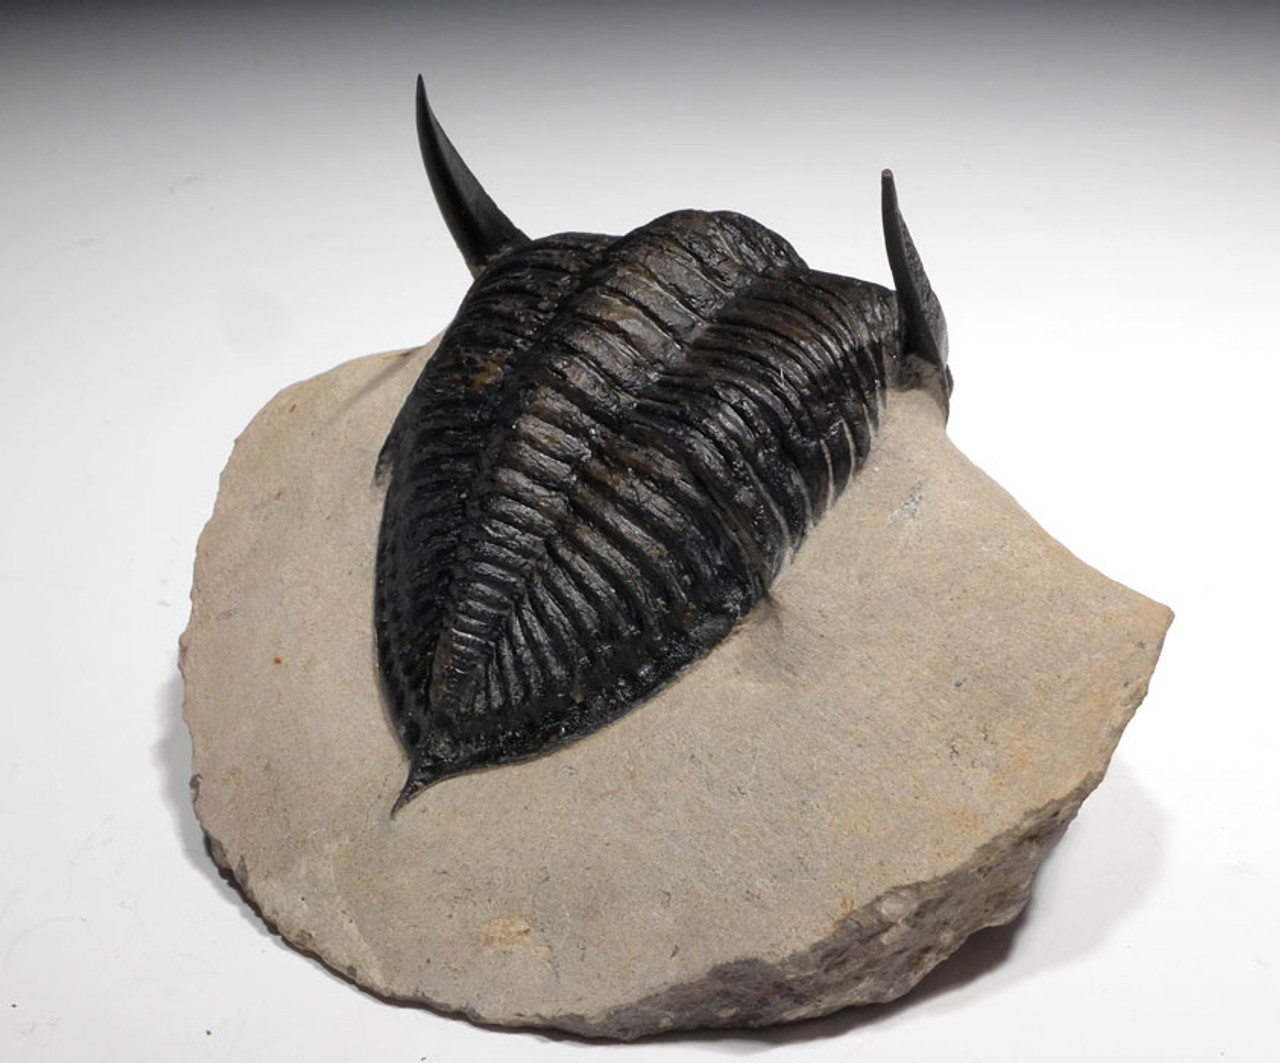 OUR LARGEST EVER 5.75 INCH ZLICHOVASPIS ONDONTOCHILE TRILOBITE WITH FULLY EXPOSED BODY AND SPINES *TRX377